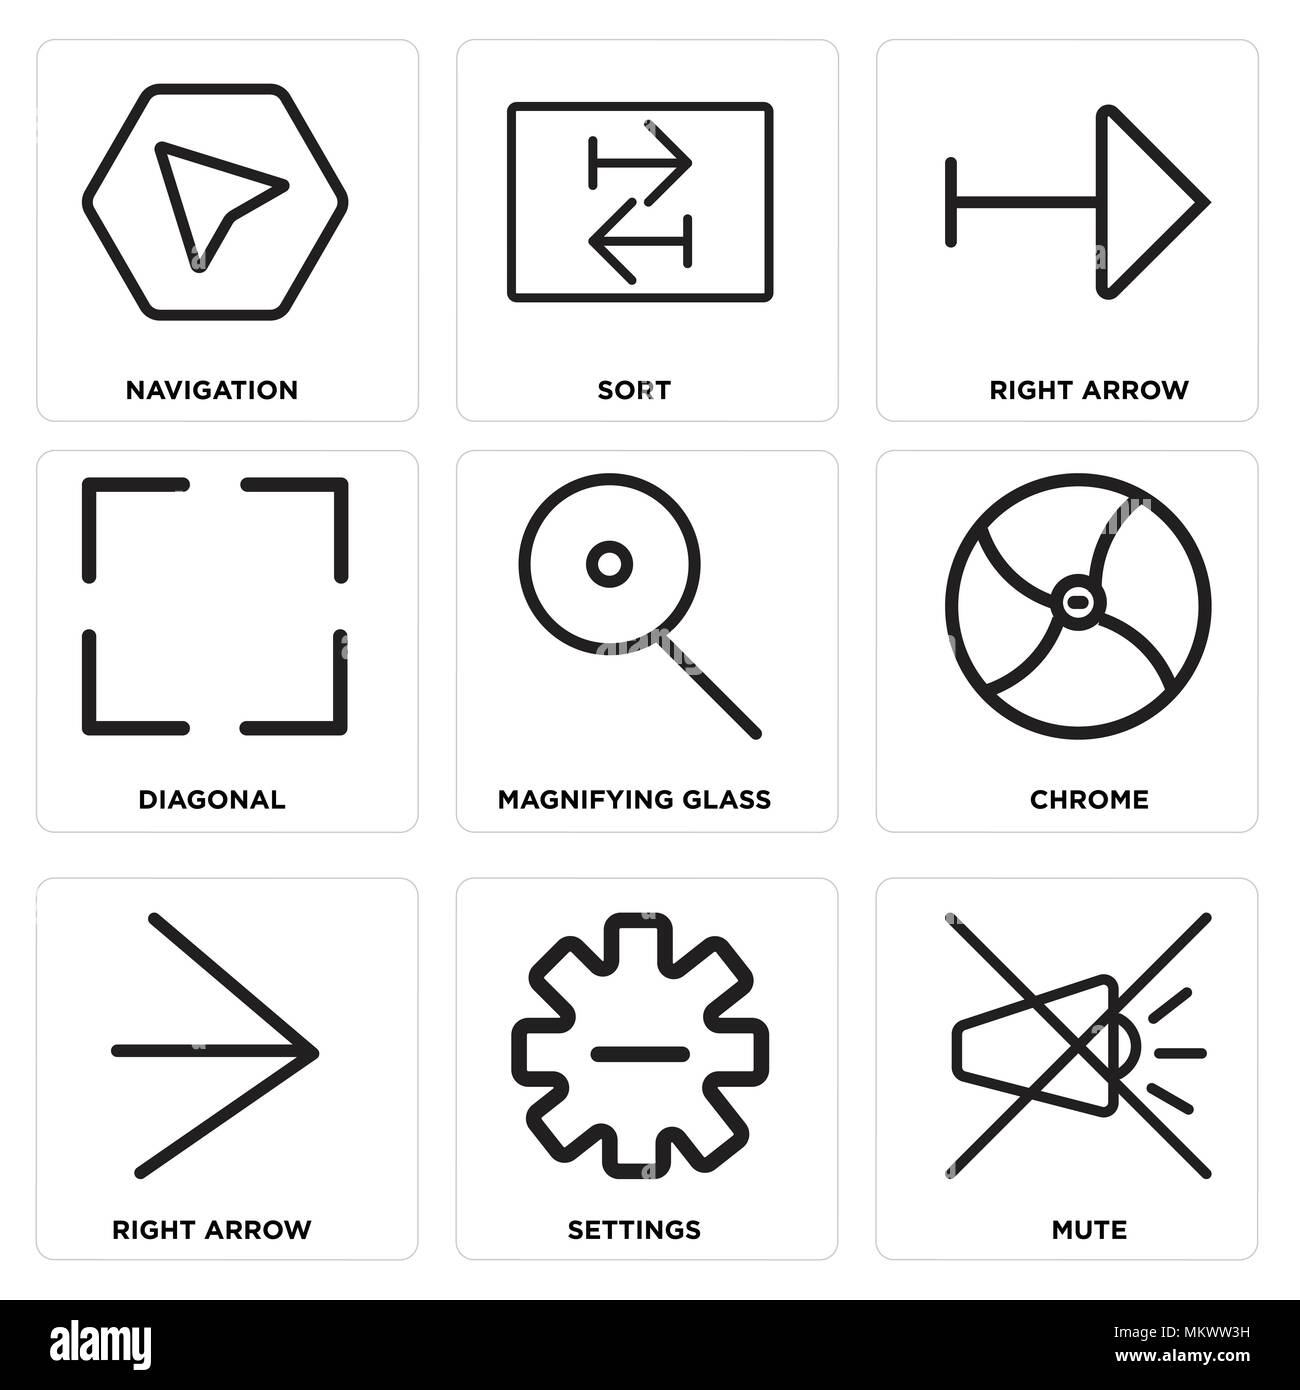 Set Of 9 simple editable icons such as Mute, Settings, Right arrow, Chrome, Magnifying glass, Diagonal, Sort, Navigation, can be used for mobile, web Stock Vector